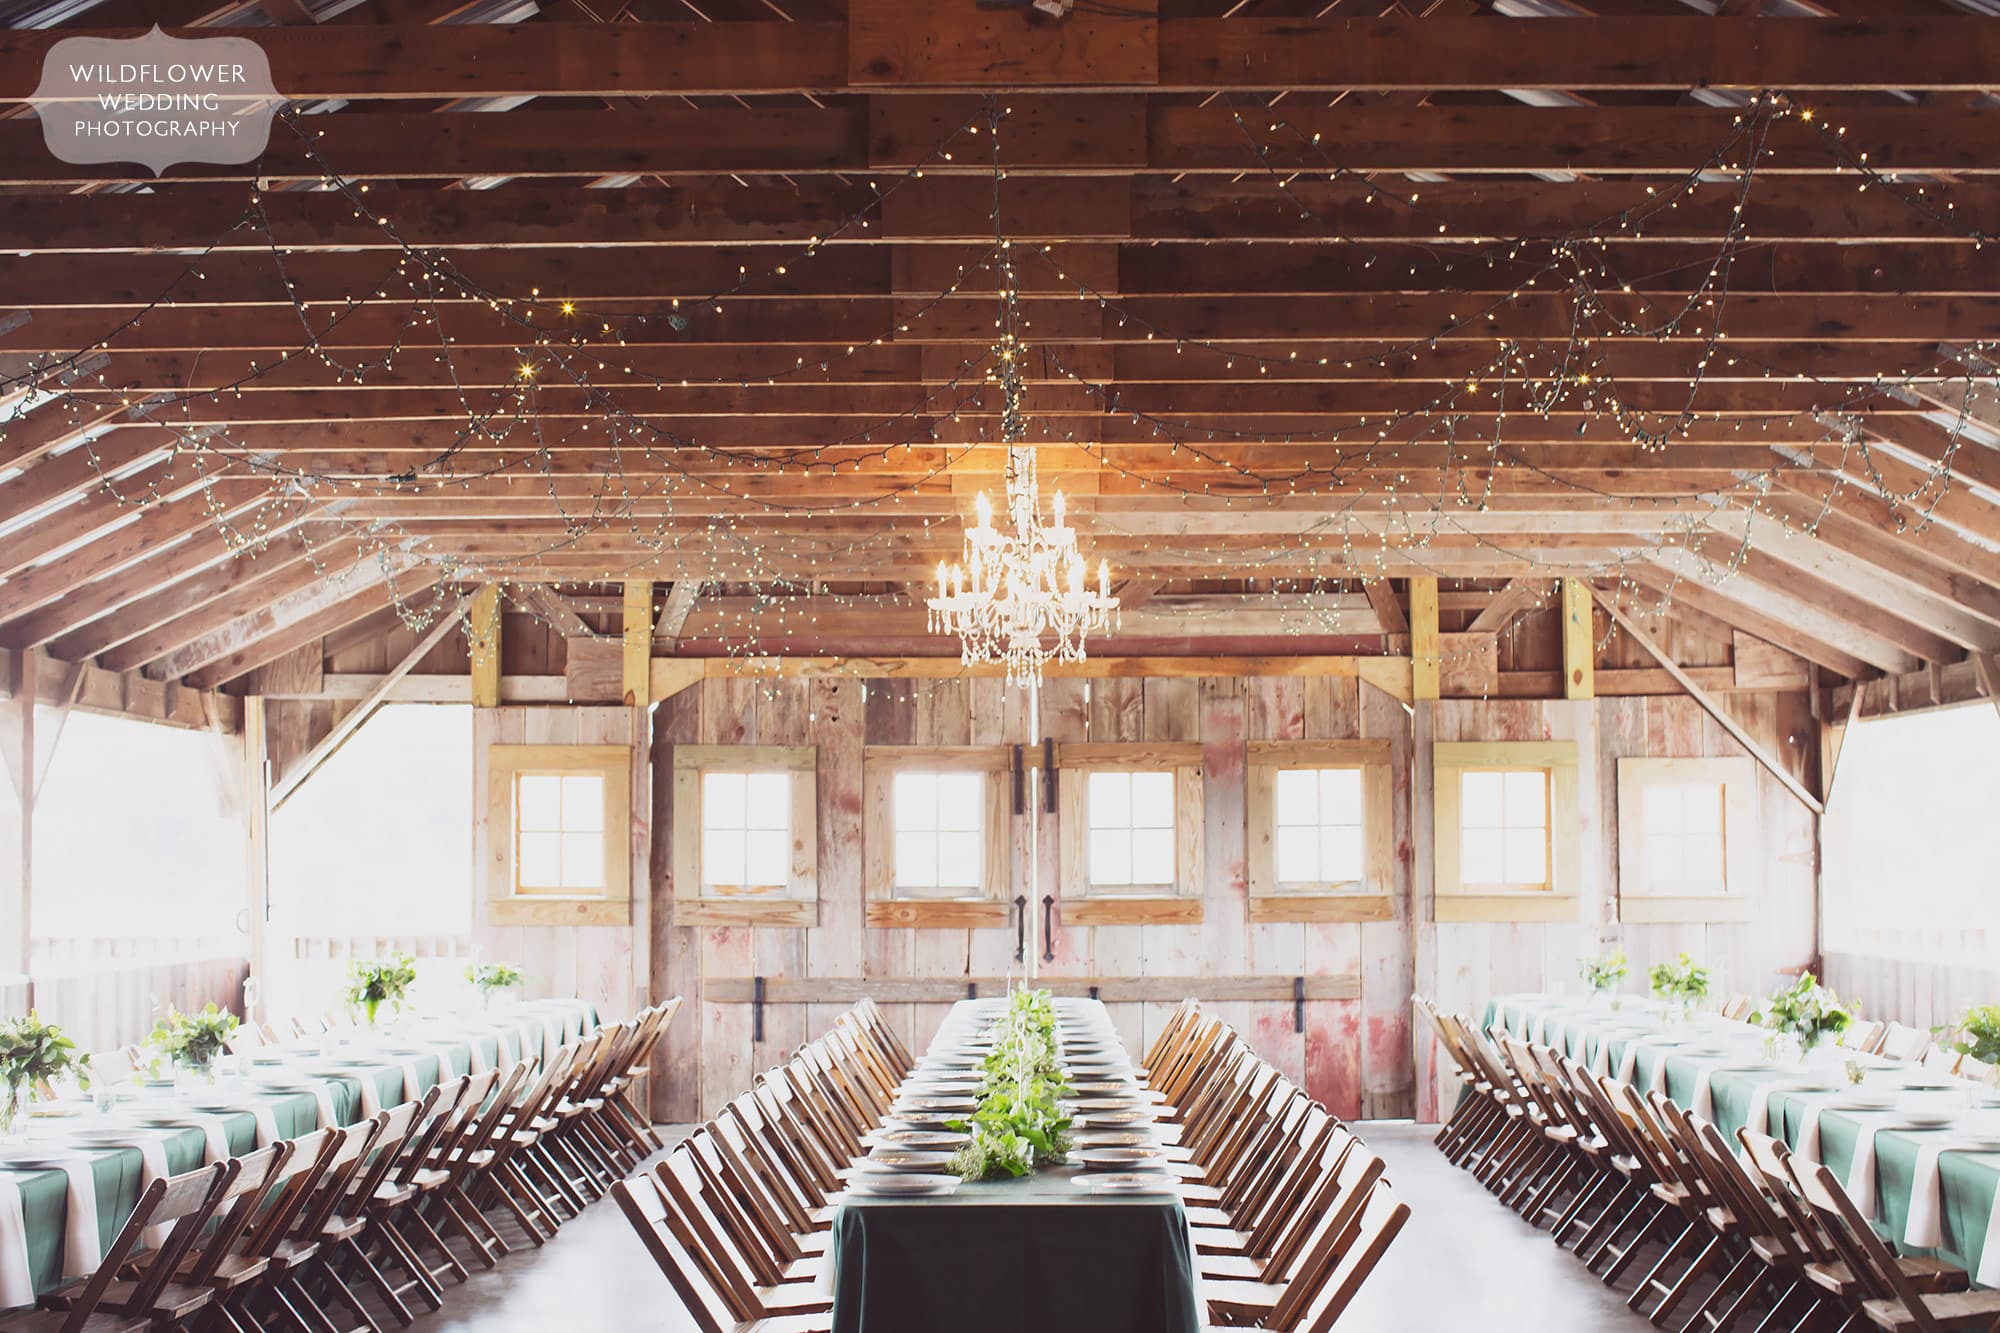 Long dinner tables are set with green tablecloths for this romantic Missouri barn wedding.